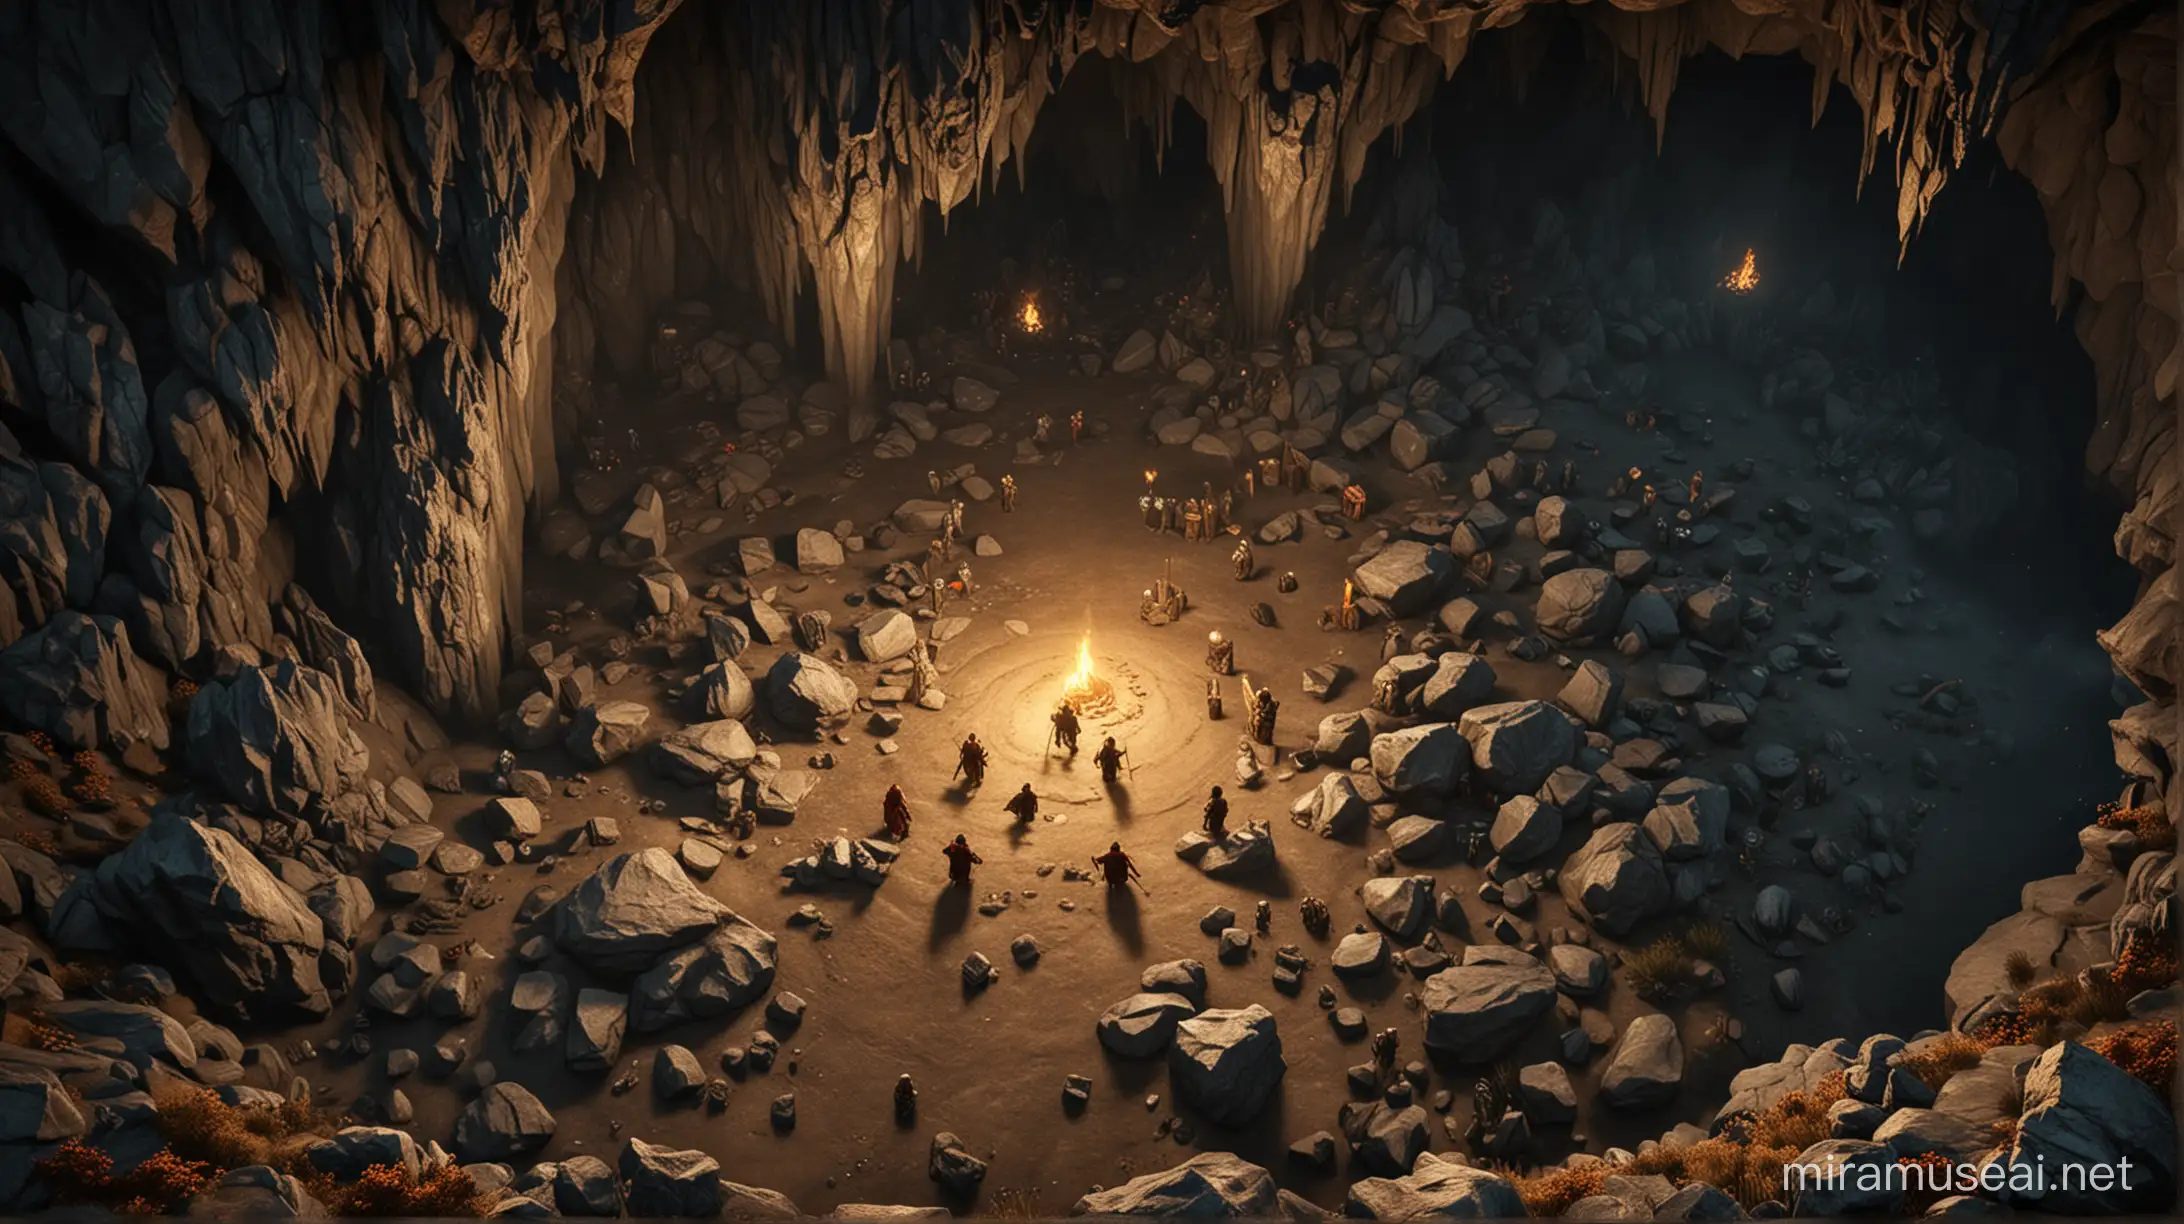 Epic Lord of the Rings Inspired Action RPG in a Vast Cave